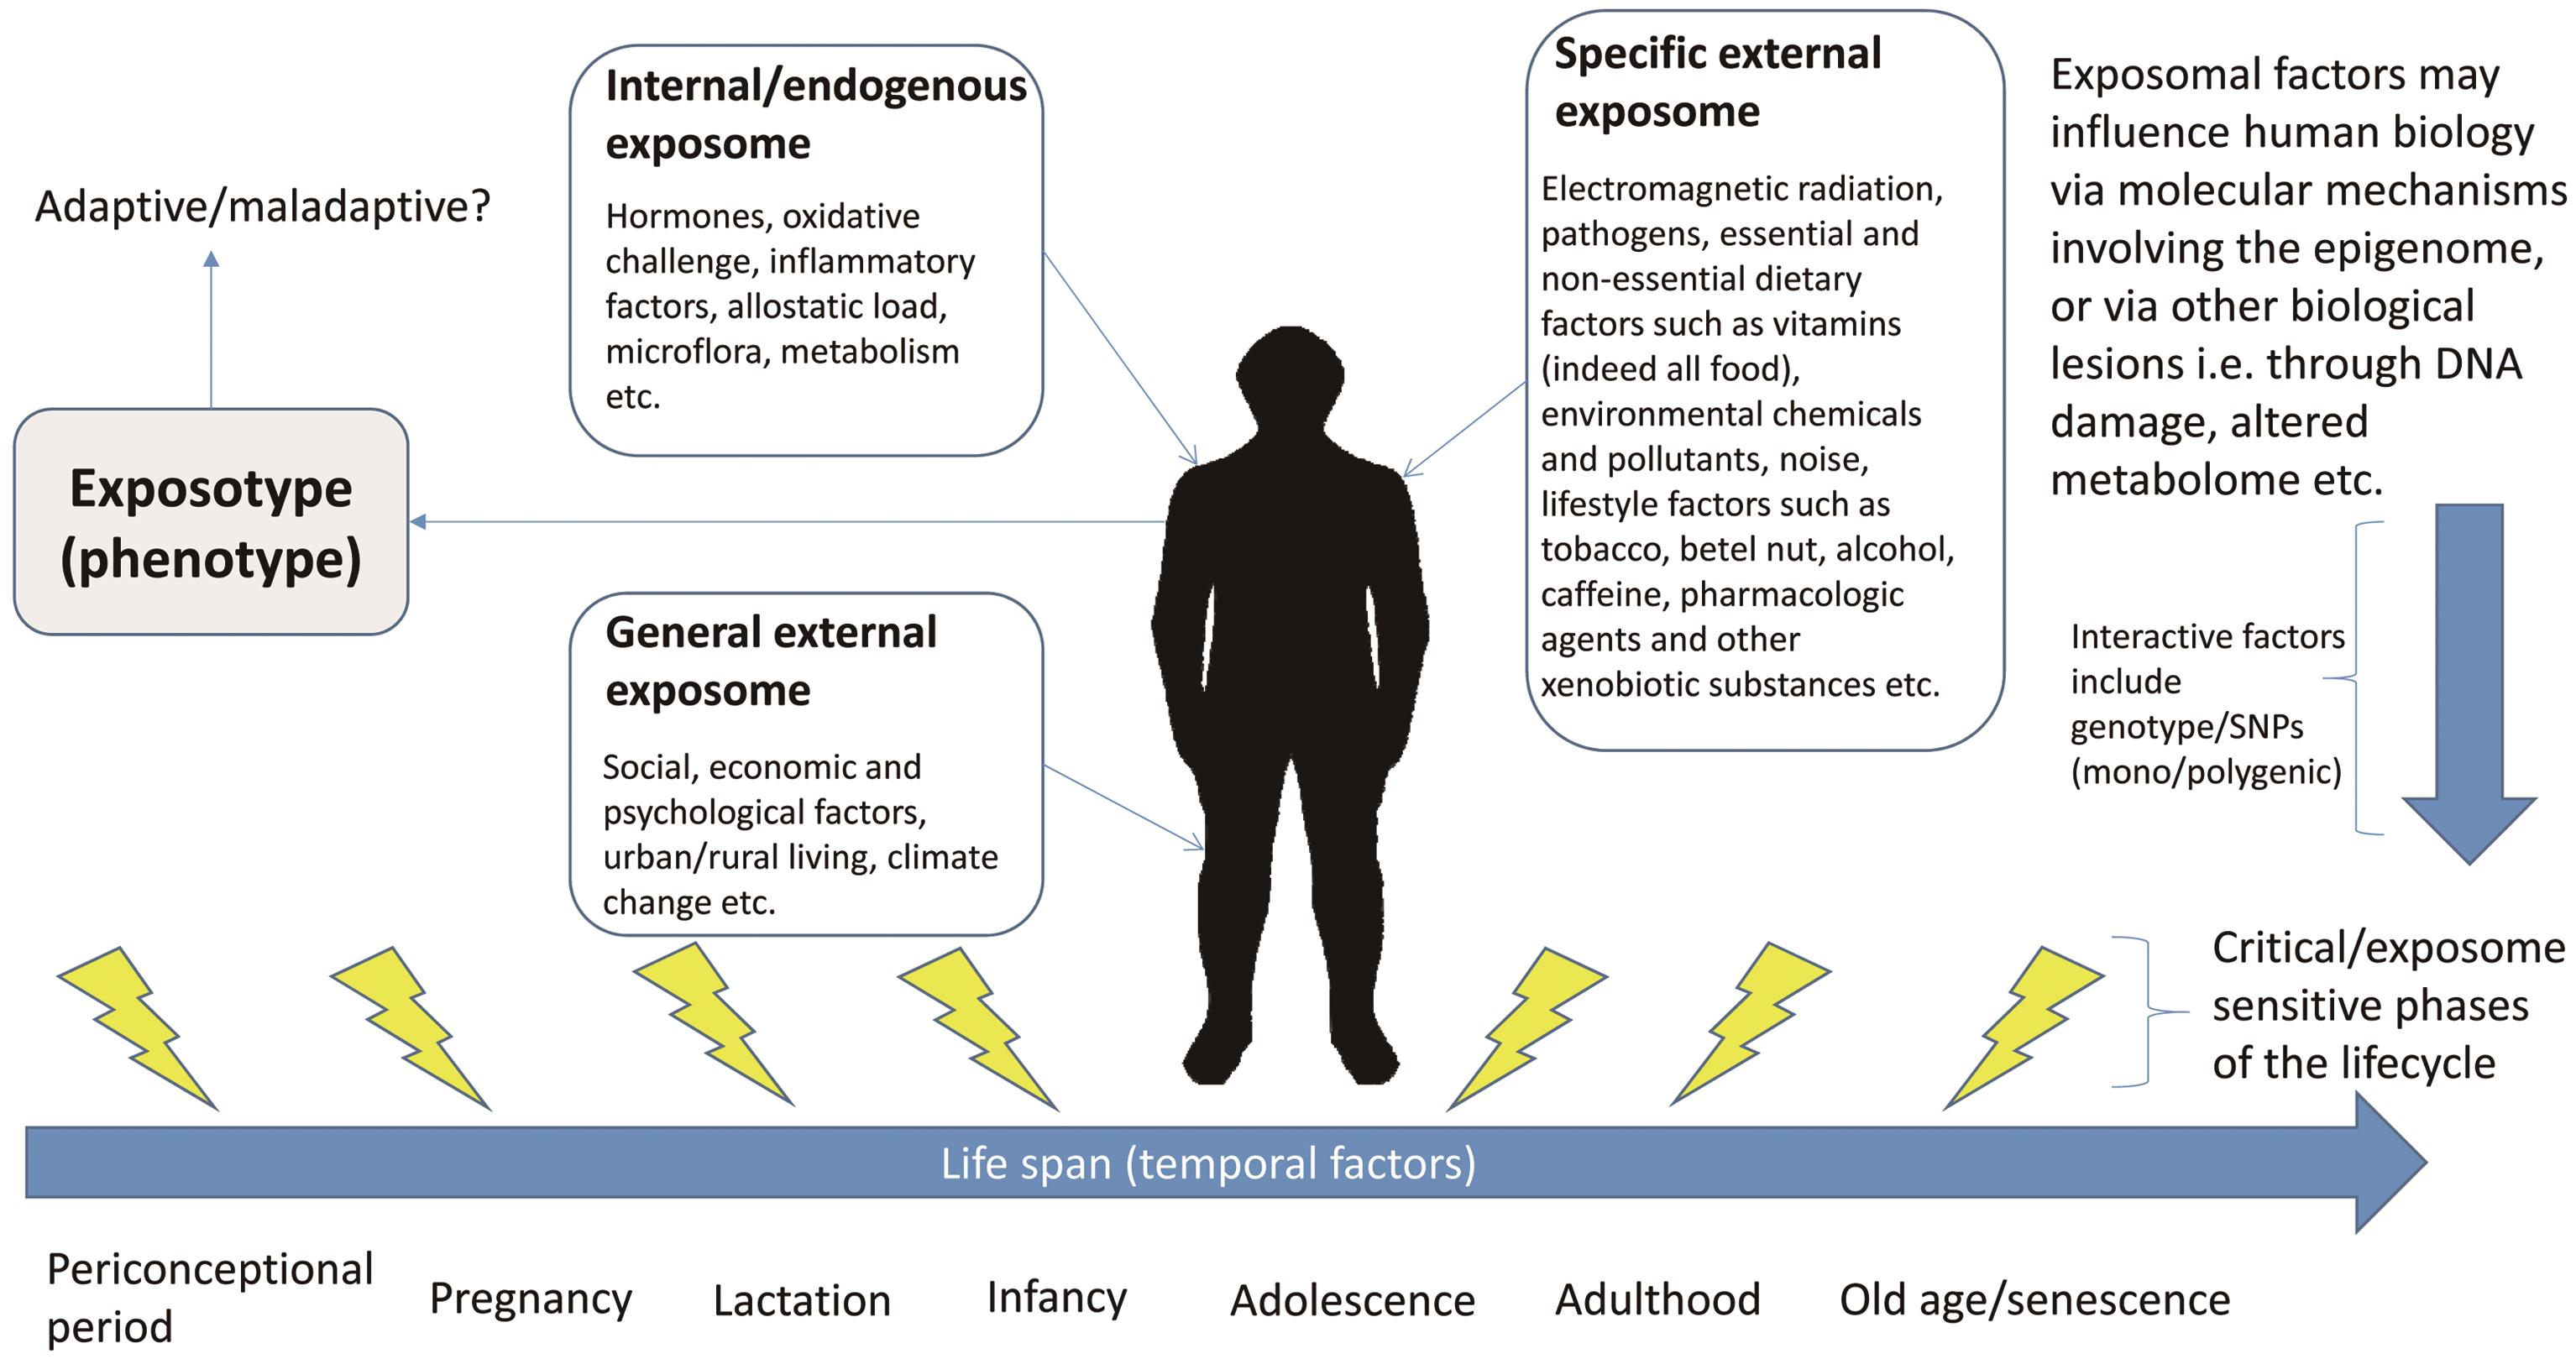 Schematic showing some of the main exposomal factors that humans may experience.